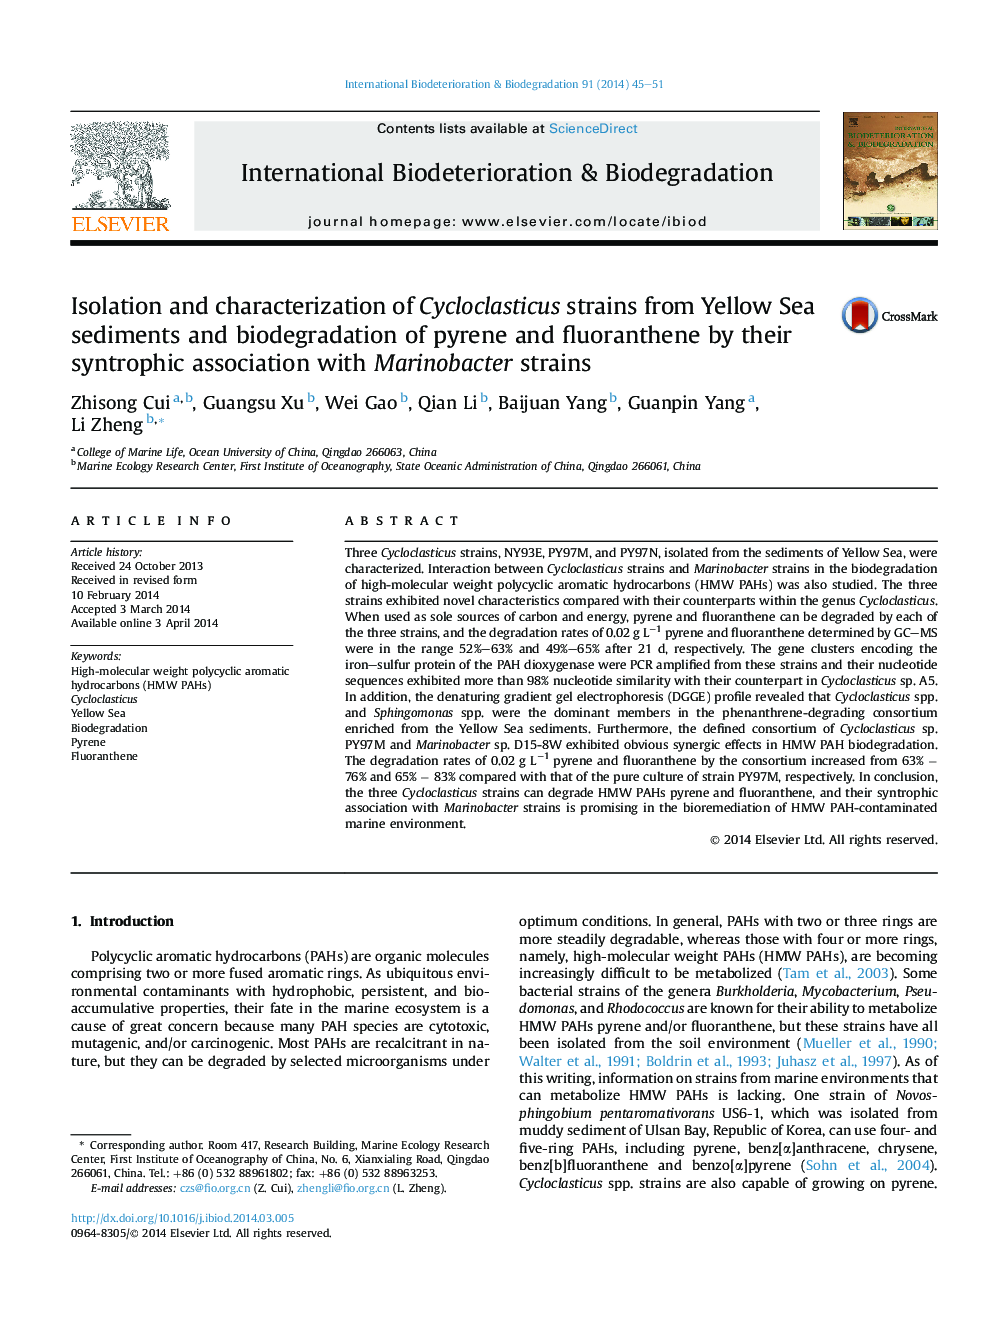 Isolation and characterization of Cycloclasticus strains from Yellow Sea sediments and biodegradation of pyrene and fluoranthene by their syntrophic association with Marinobacter strains